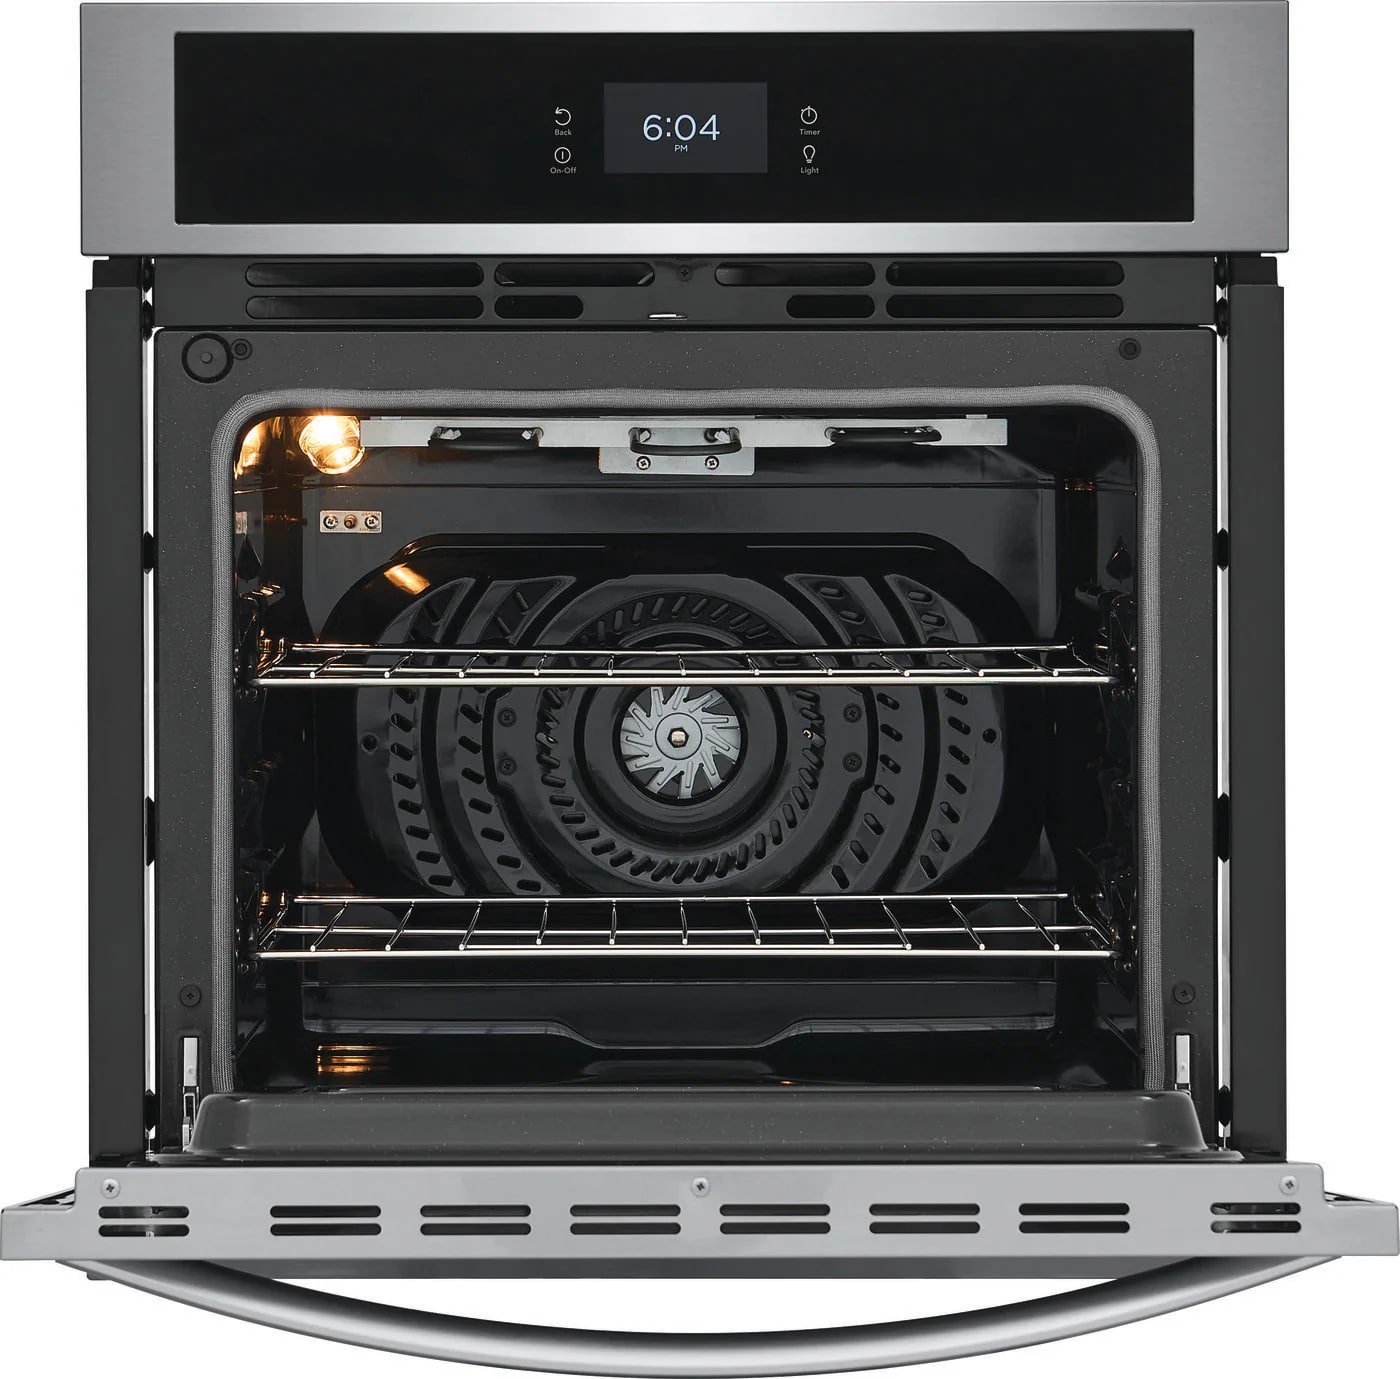 Frigidaire - 3.8 cu. ft Single Wall Oven in Stainless - FCWS2727AS